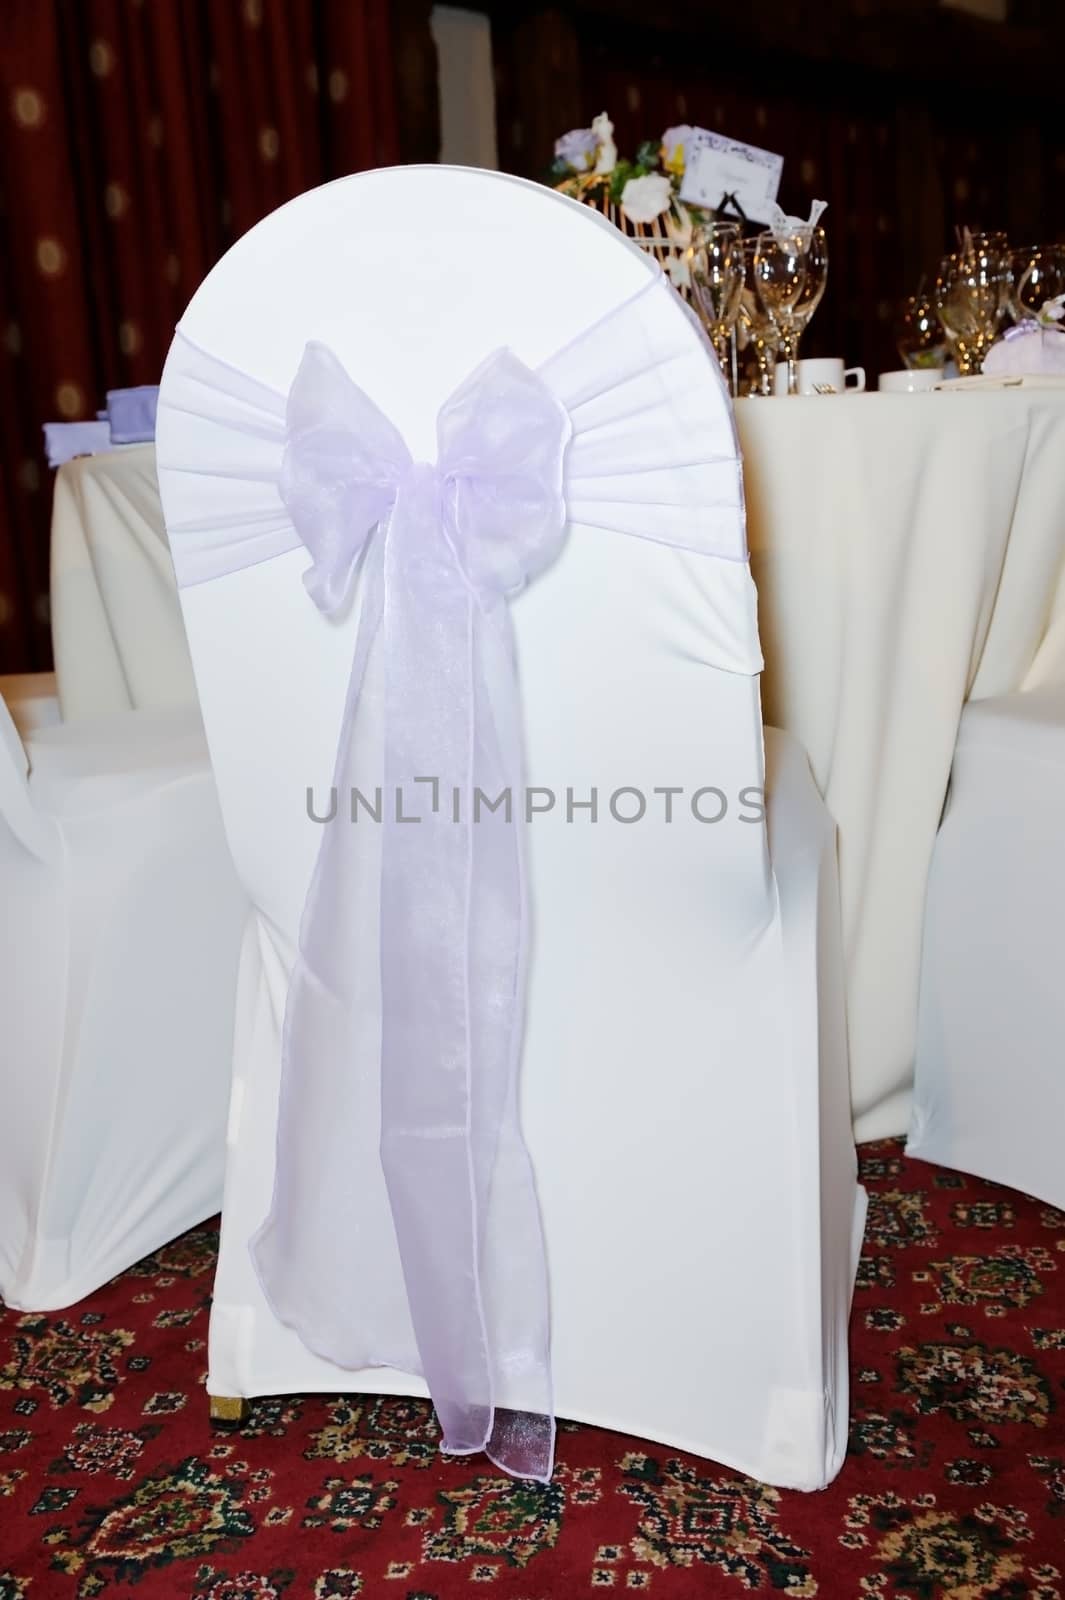 Chair cover at wedding reception by kmwphotography